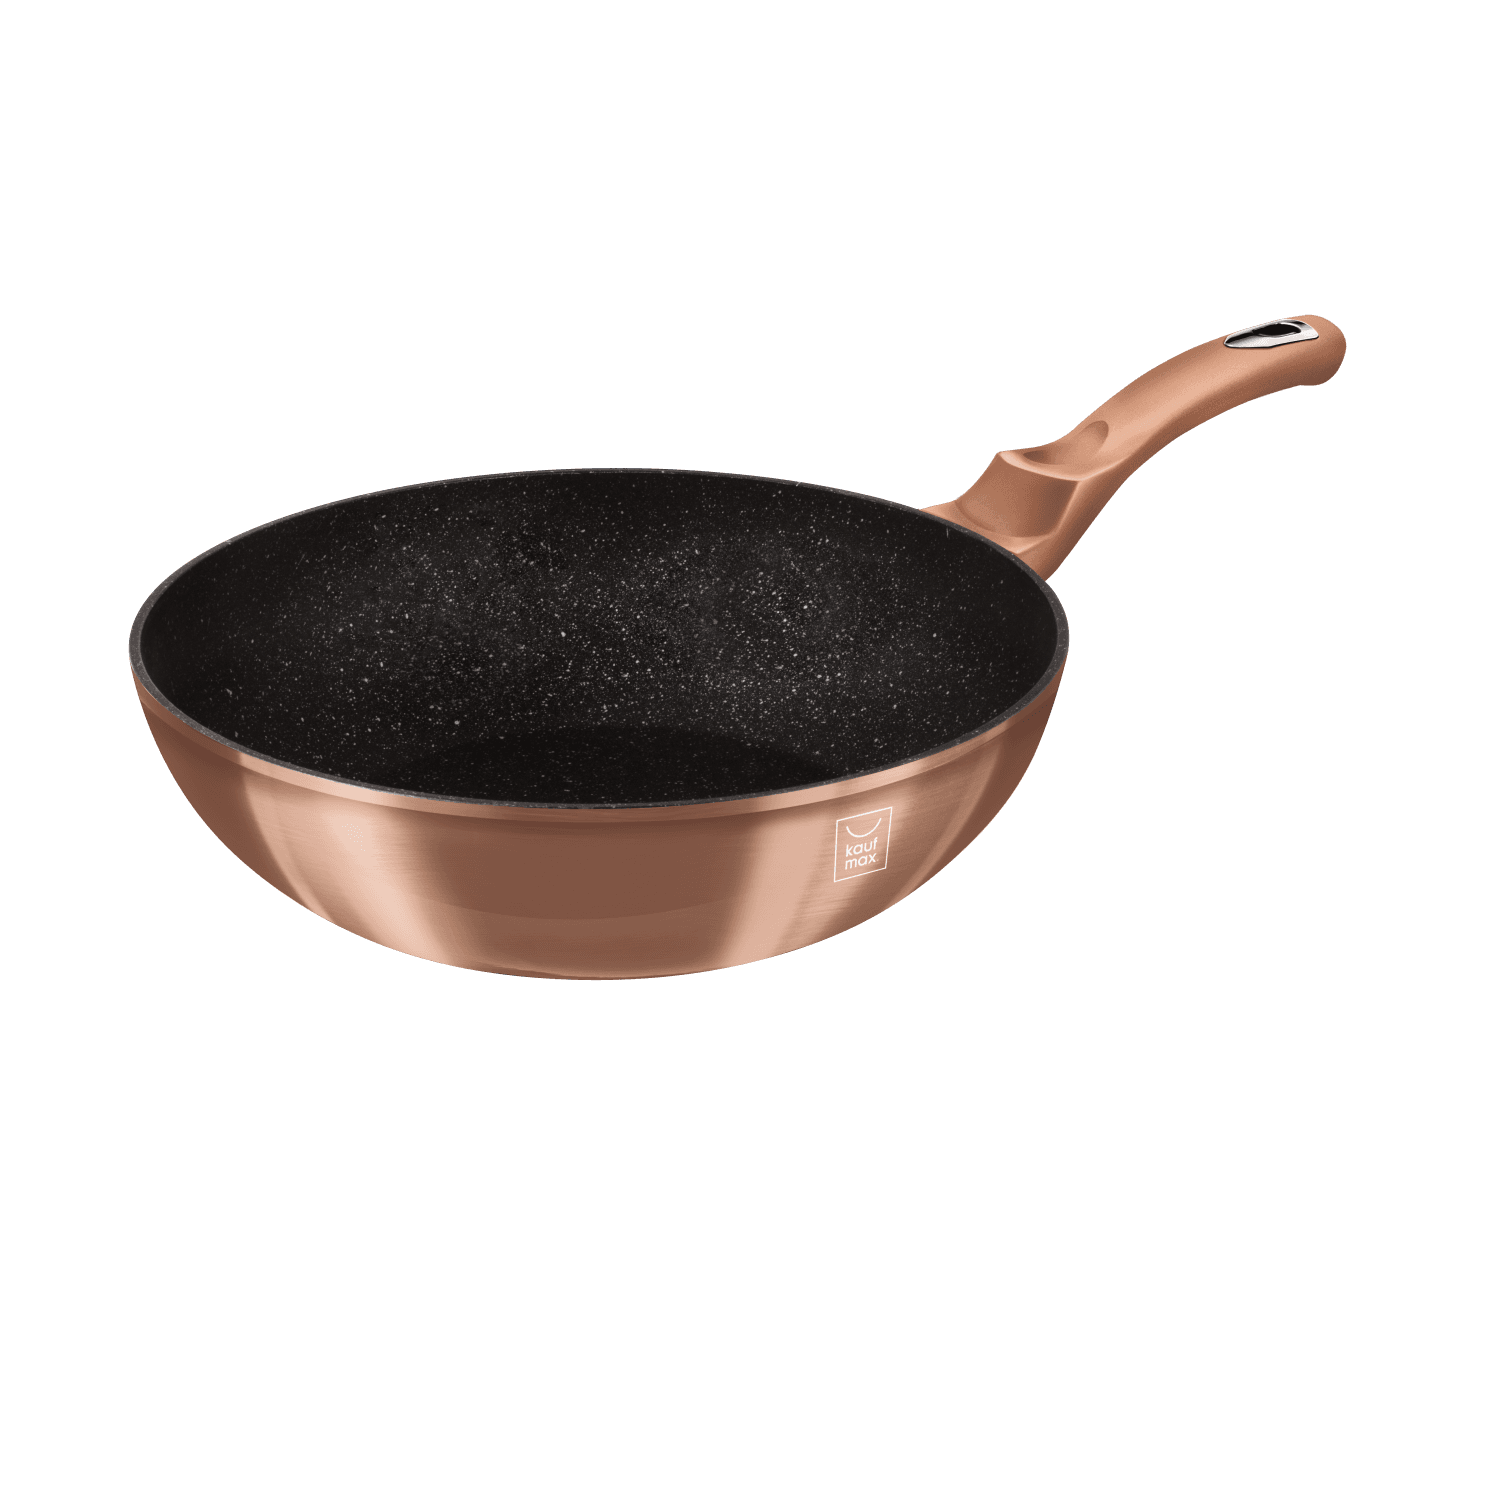 Selected image for KAUFMAX WOK Tiganj Rose Gold Metalic Collection KM-0051 28cm